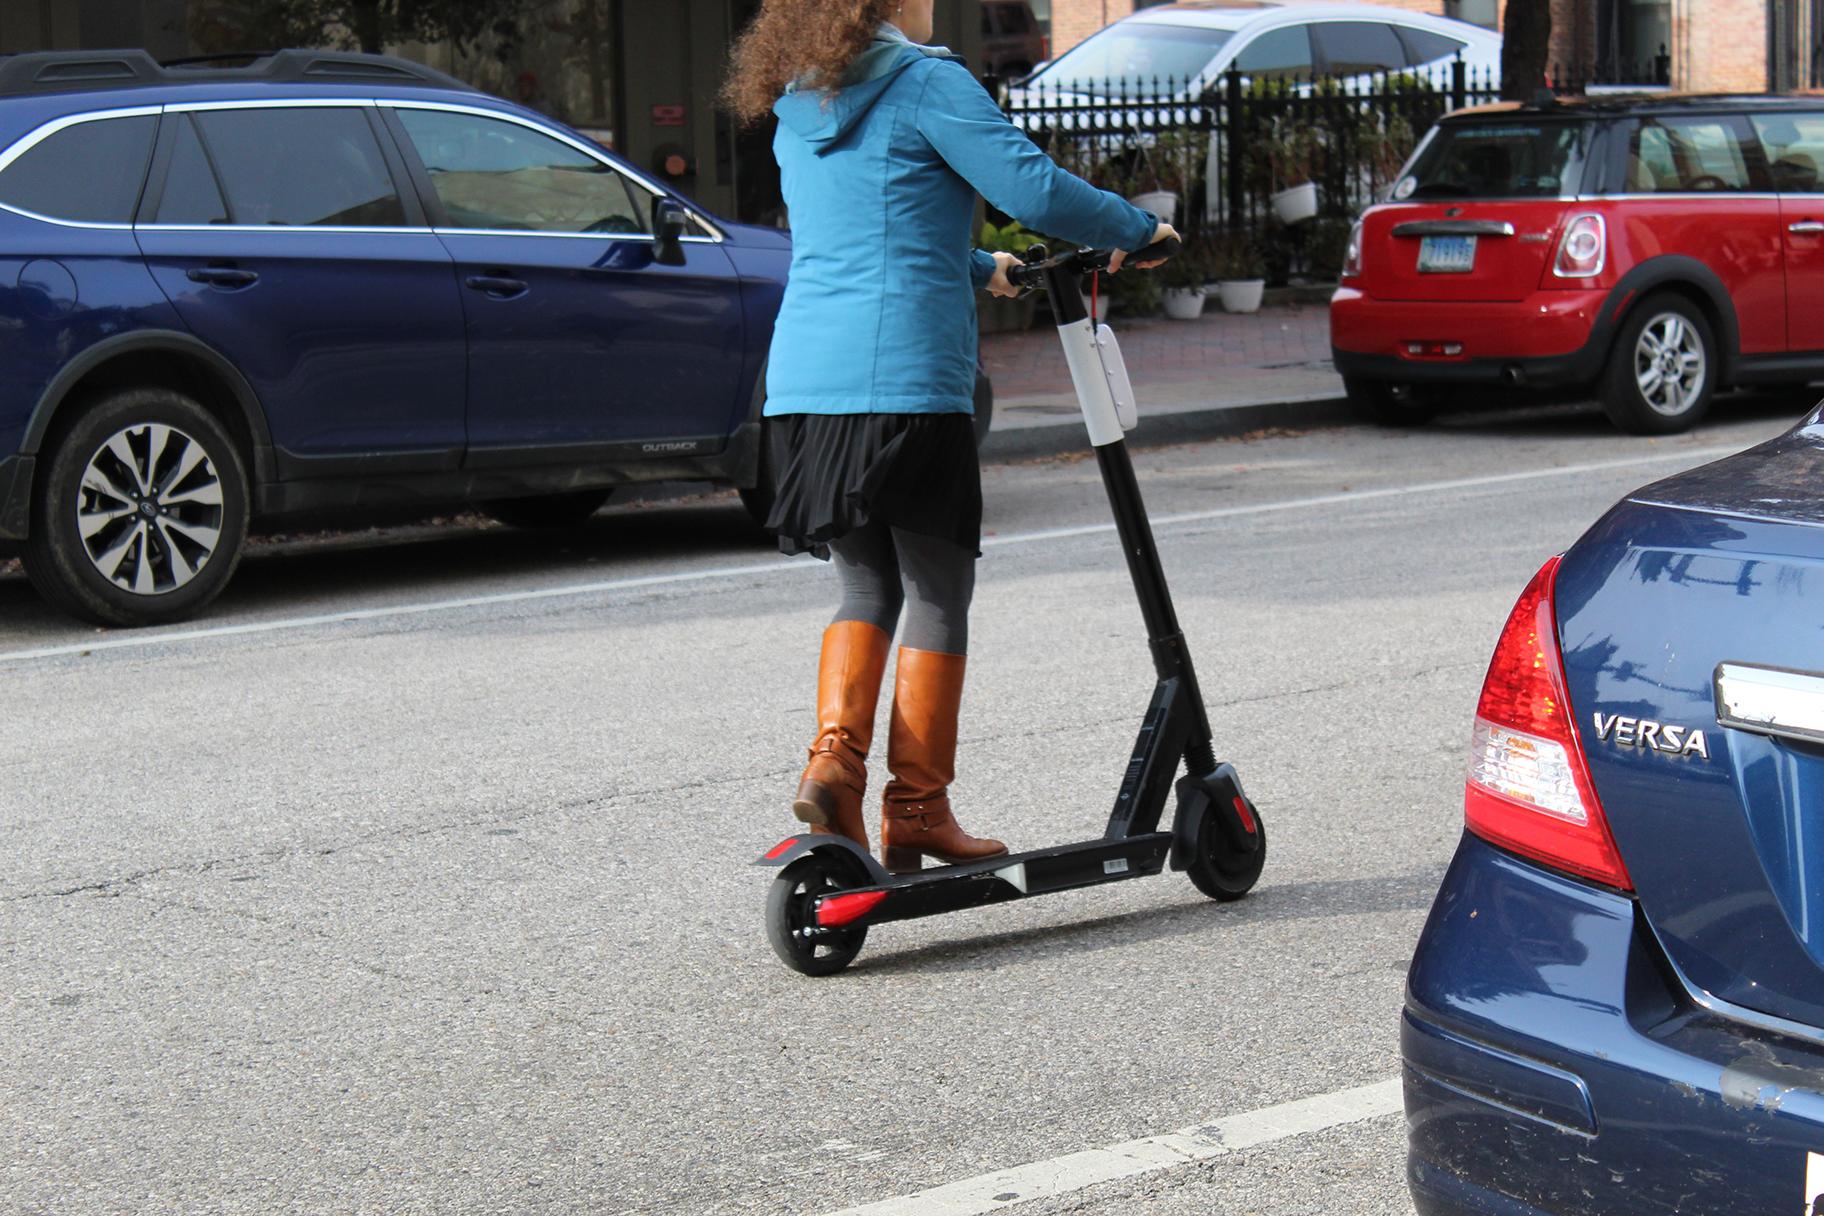 A woman rides an electric scooter in Baltimore on Nov. 18, 2018. (Elvert Barnes / Flickr) 